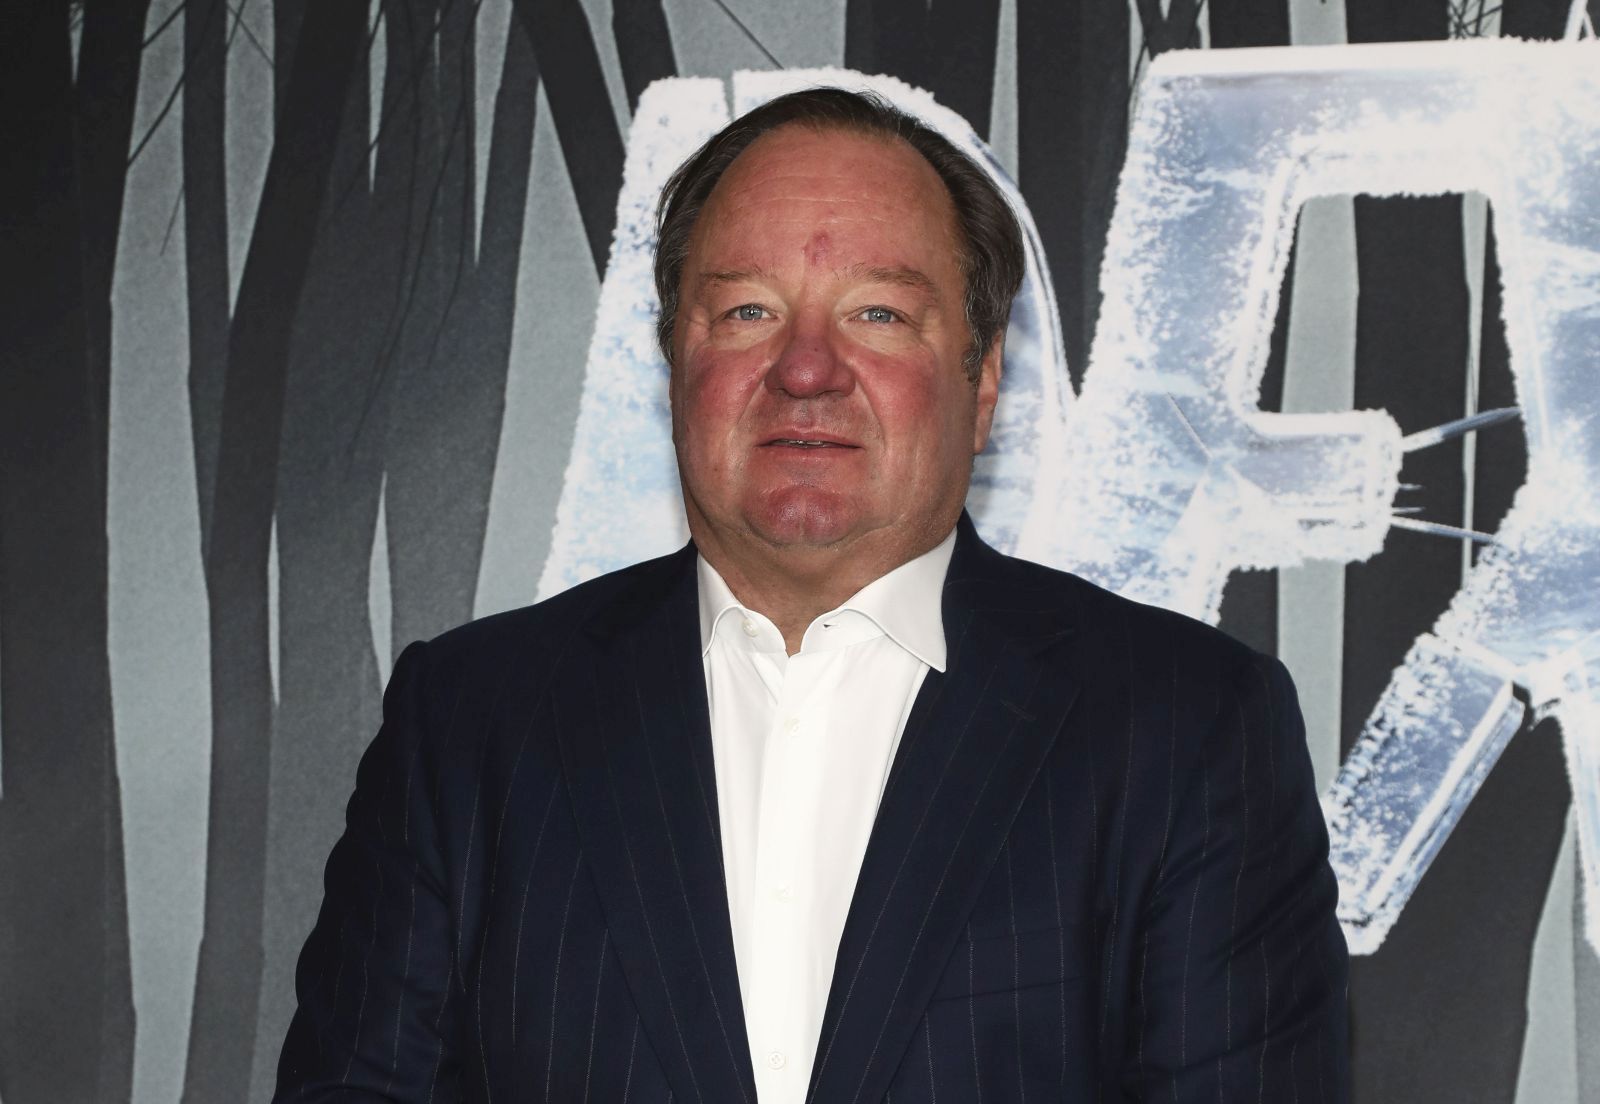 President and CEO of ViacomCBS Bob Bakish attends the world premiere of the Showtime drama series "Dexter: New Blood" at Alice Tully Hall on Monday, Nov. 1, 2021, in New York. (Photo by Andy Kropa/Invision/AP)